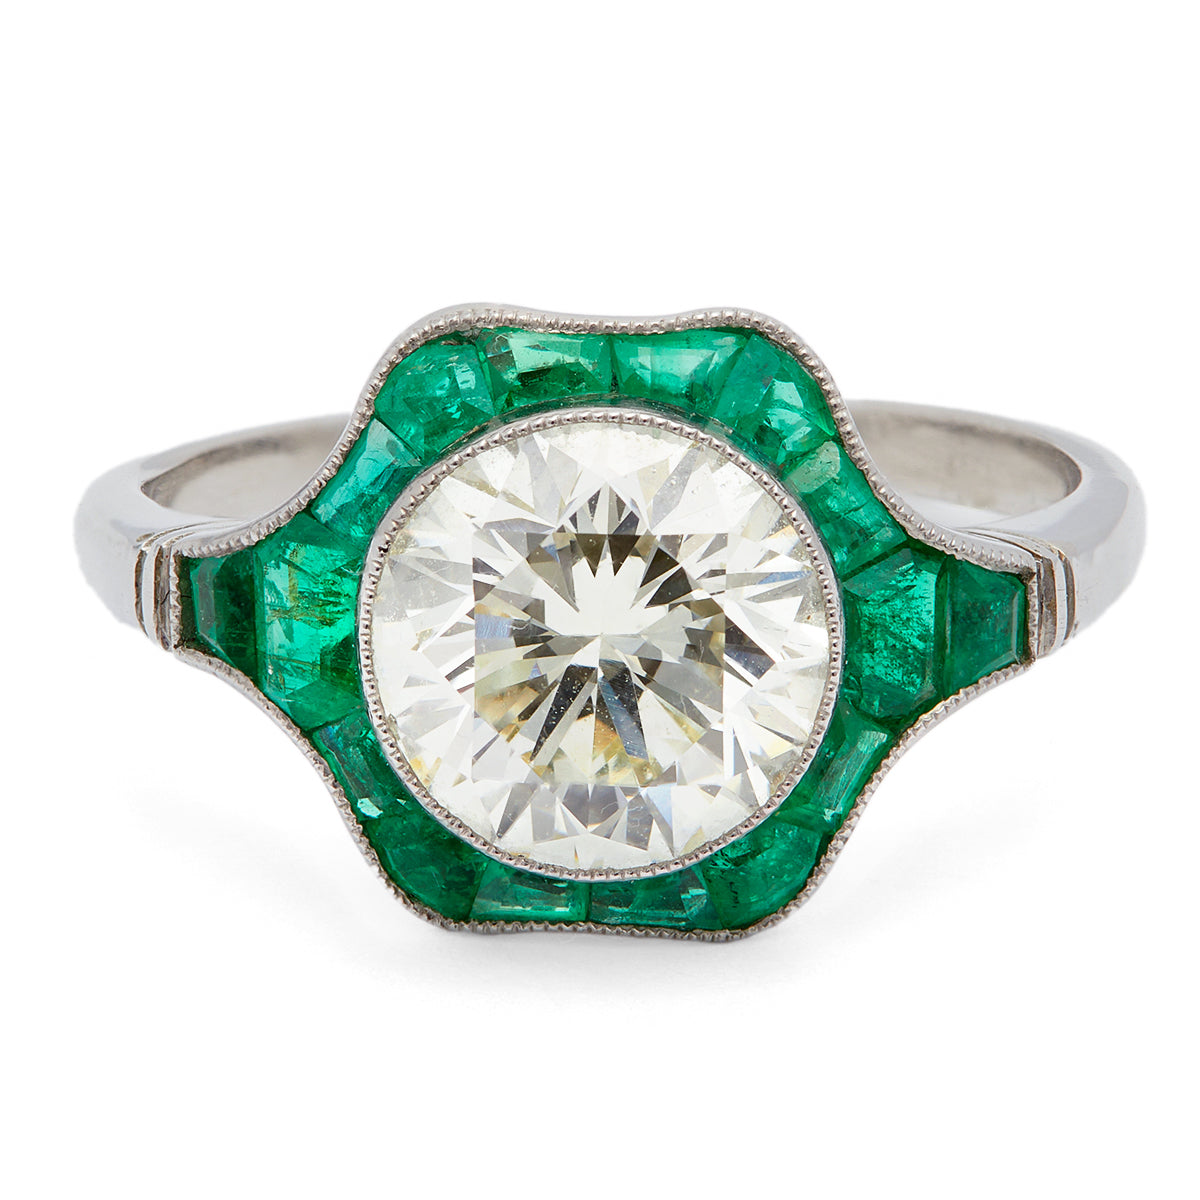 Art Deco Inspired 2.09 Carat Round Brilliant Cut Diamond and Emerald Platinum Ring Rings Jack Weir & Sons   